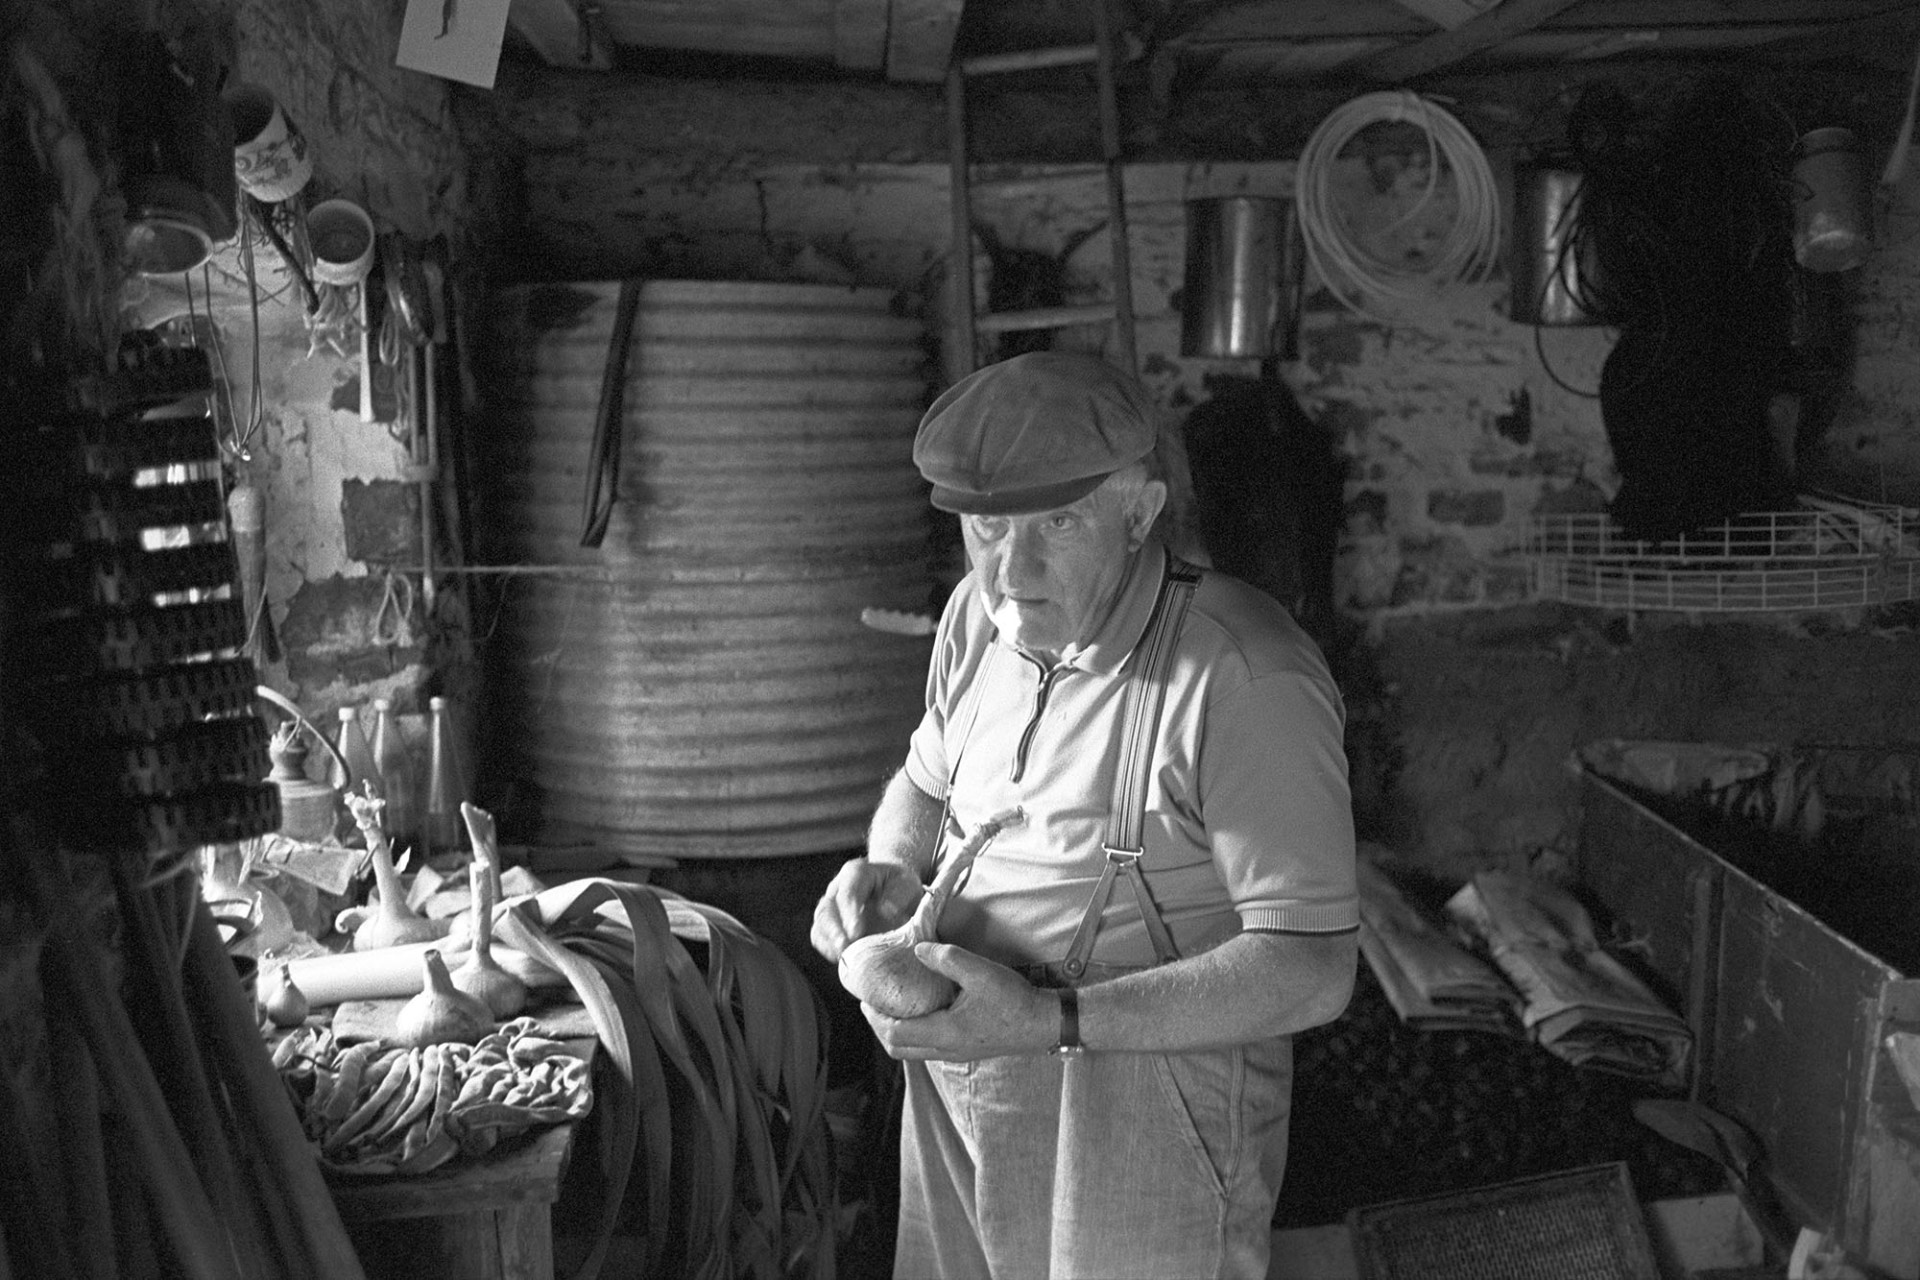 Man preparing vegetables for flower show in garden shed, onions. 
[Lloyd Mitchell sorting vegetables for the Dolton Flower Show in his shed at Pear Tree Cottage, Aller Road, Dolton. He is holding an onion. Leeks and runner beans can be seen on a table in the shed.]